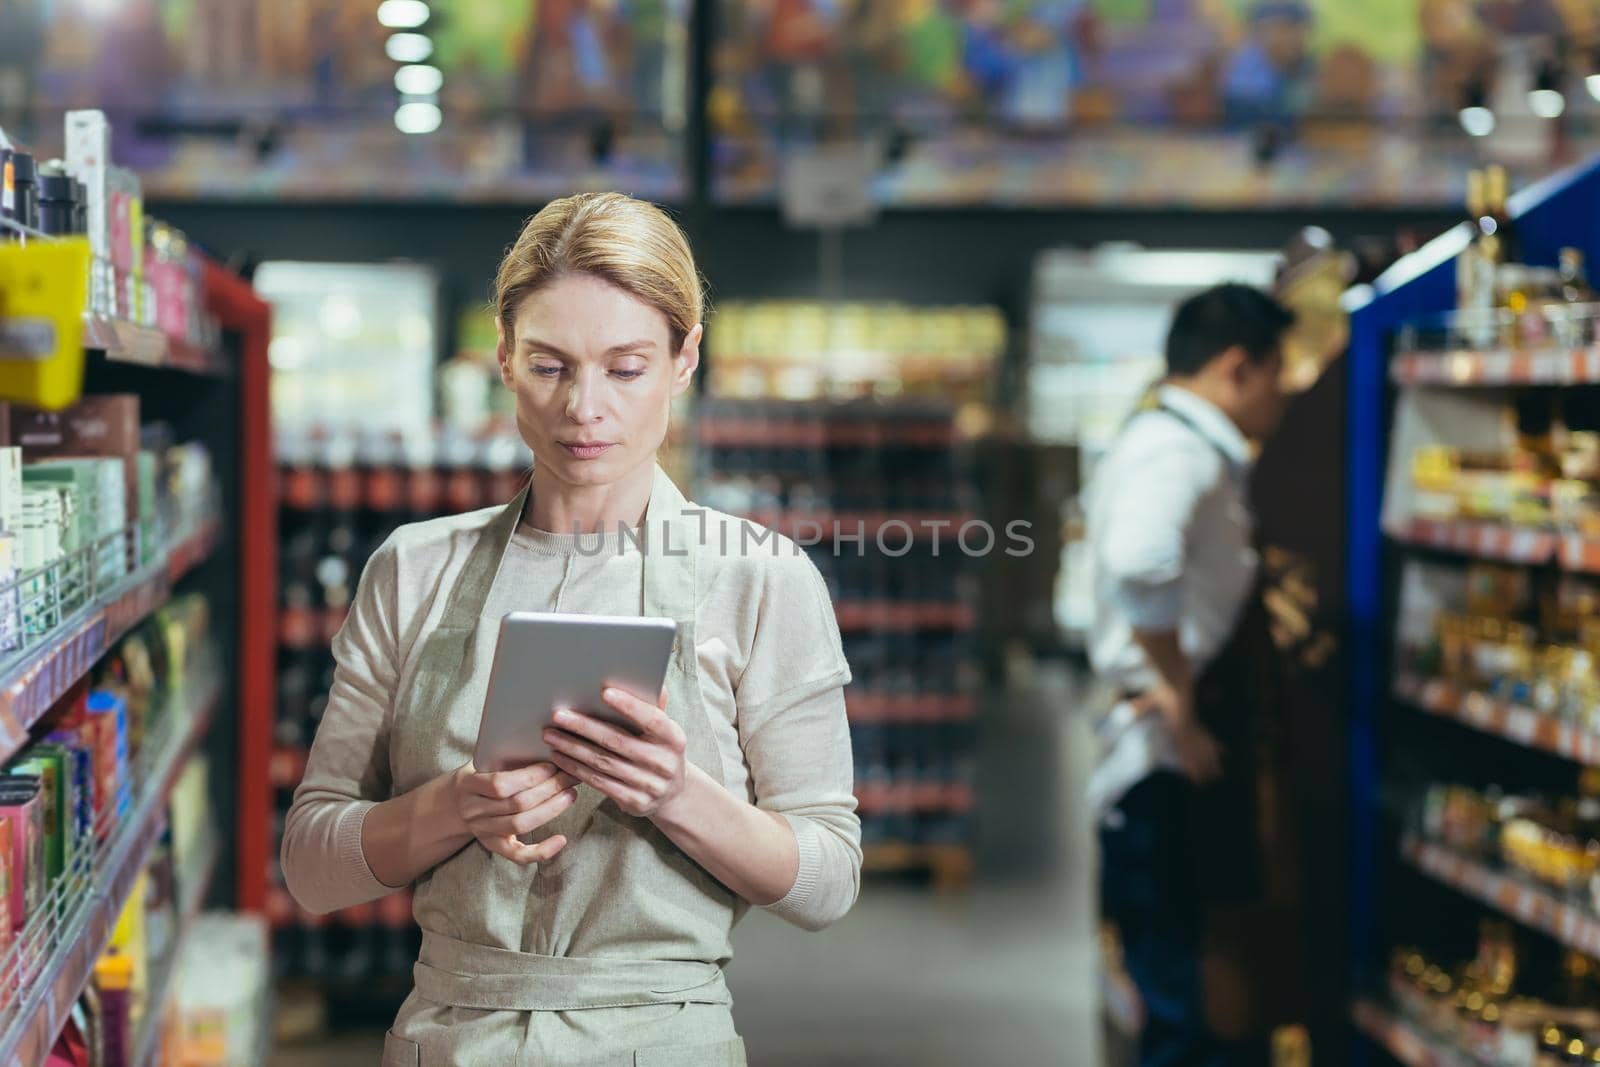 A woman seller in a supermarket uses a tablet computer to count the remaining goods, colleagues conduct an inventory in the grocery department among the shelves with goods